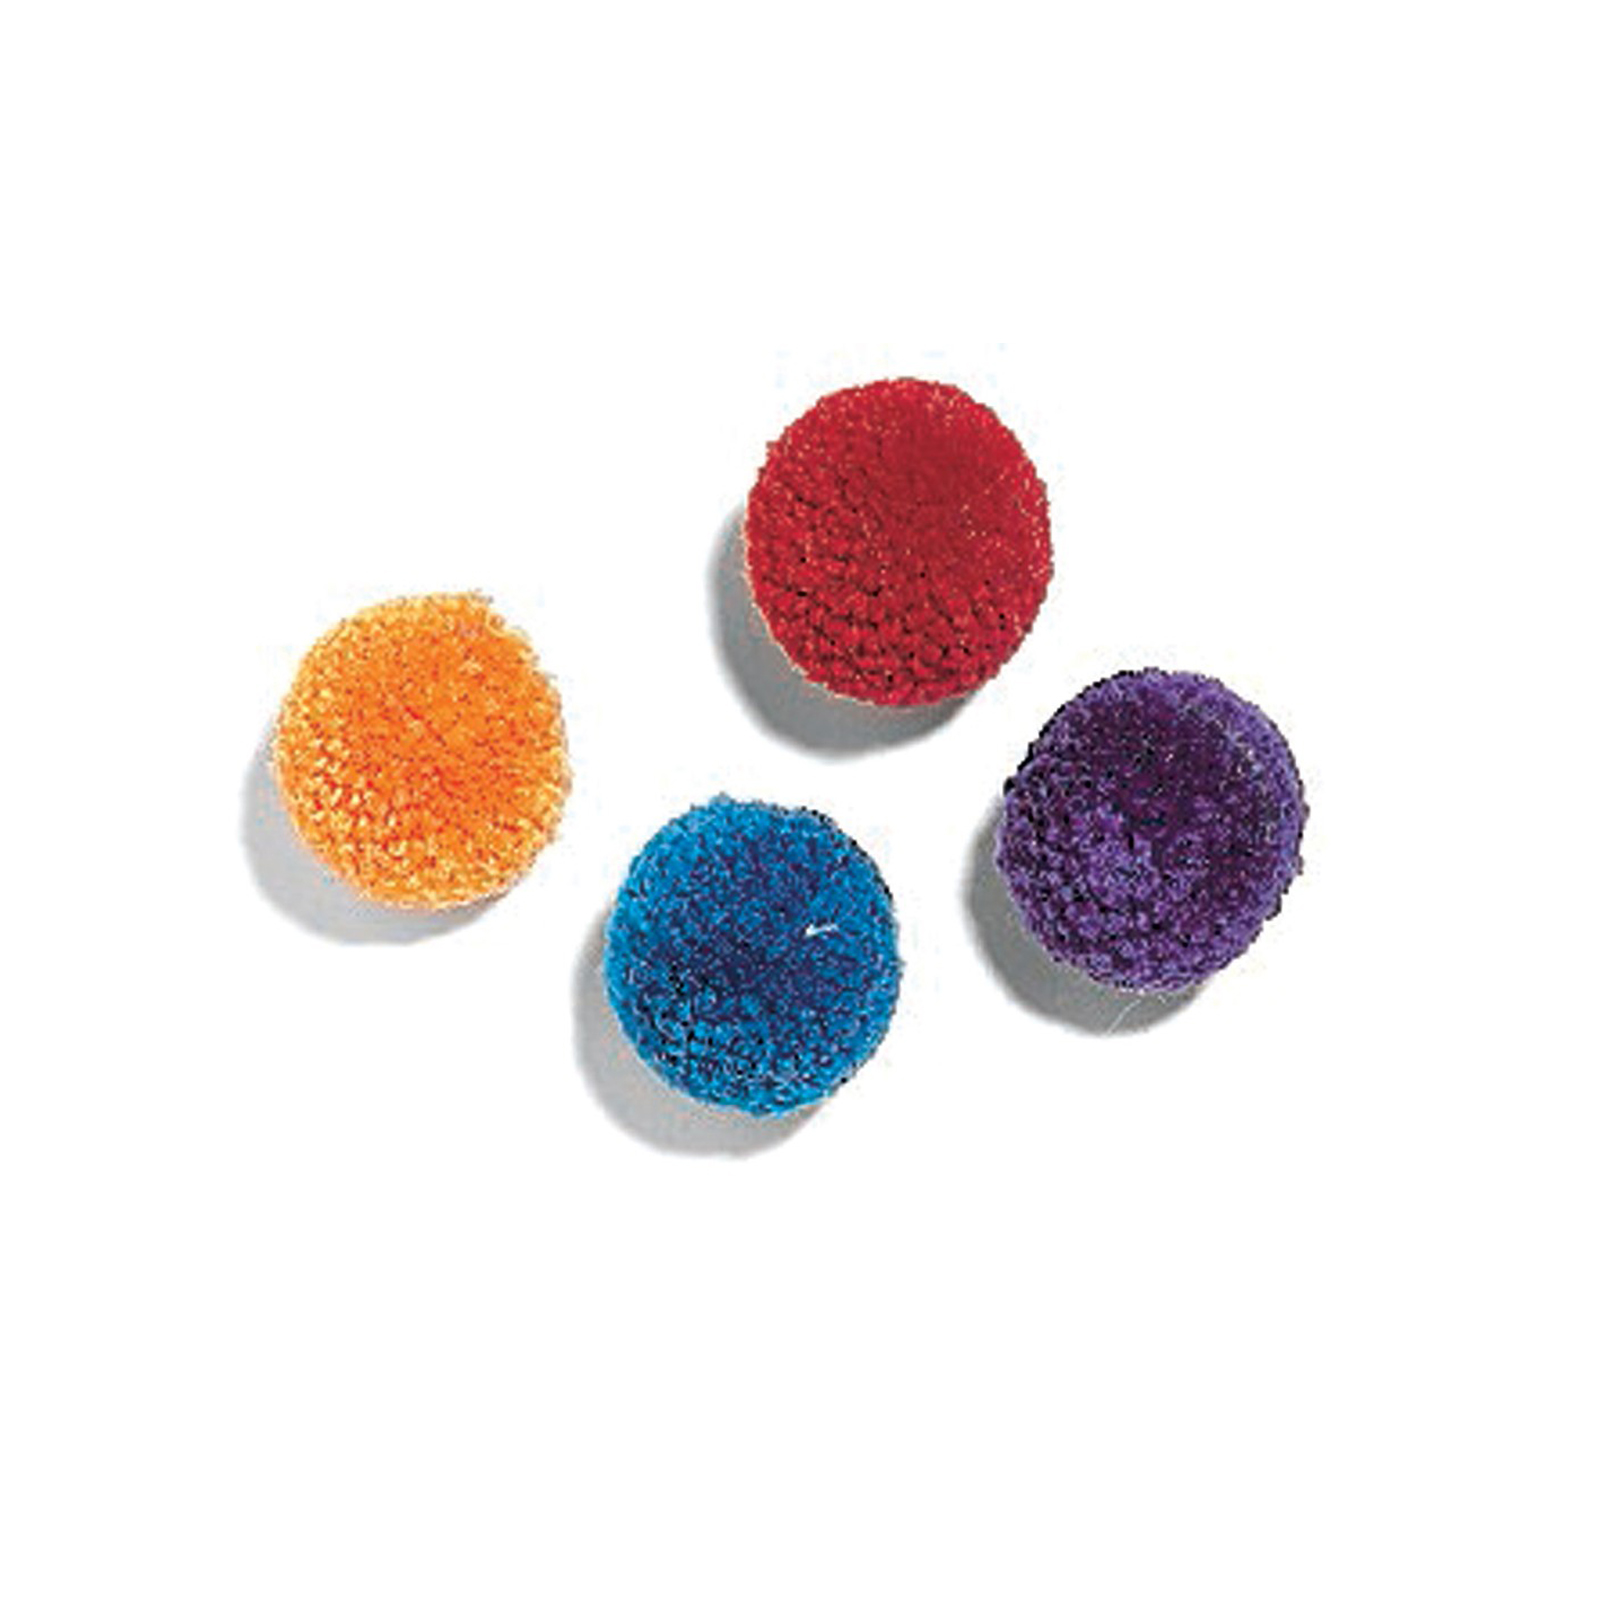 Ethical Products Inc. Toy Wool PomPom 4 pk.